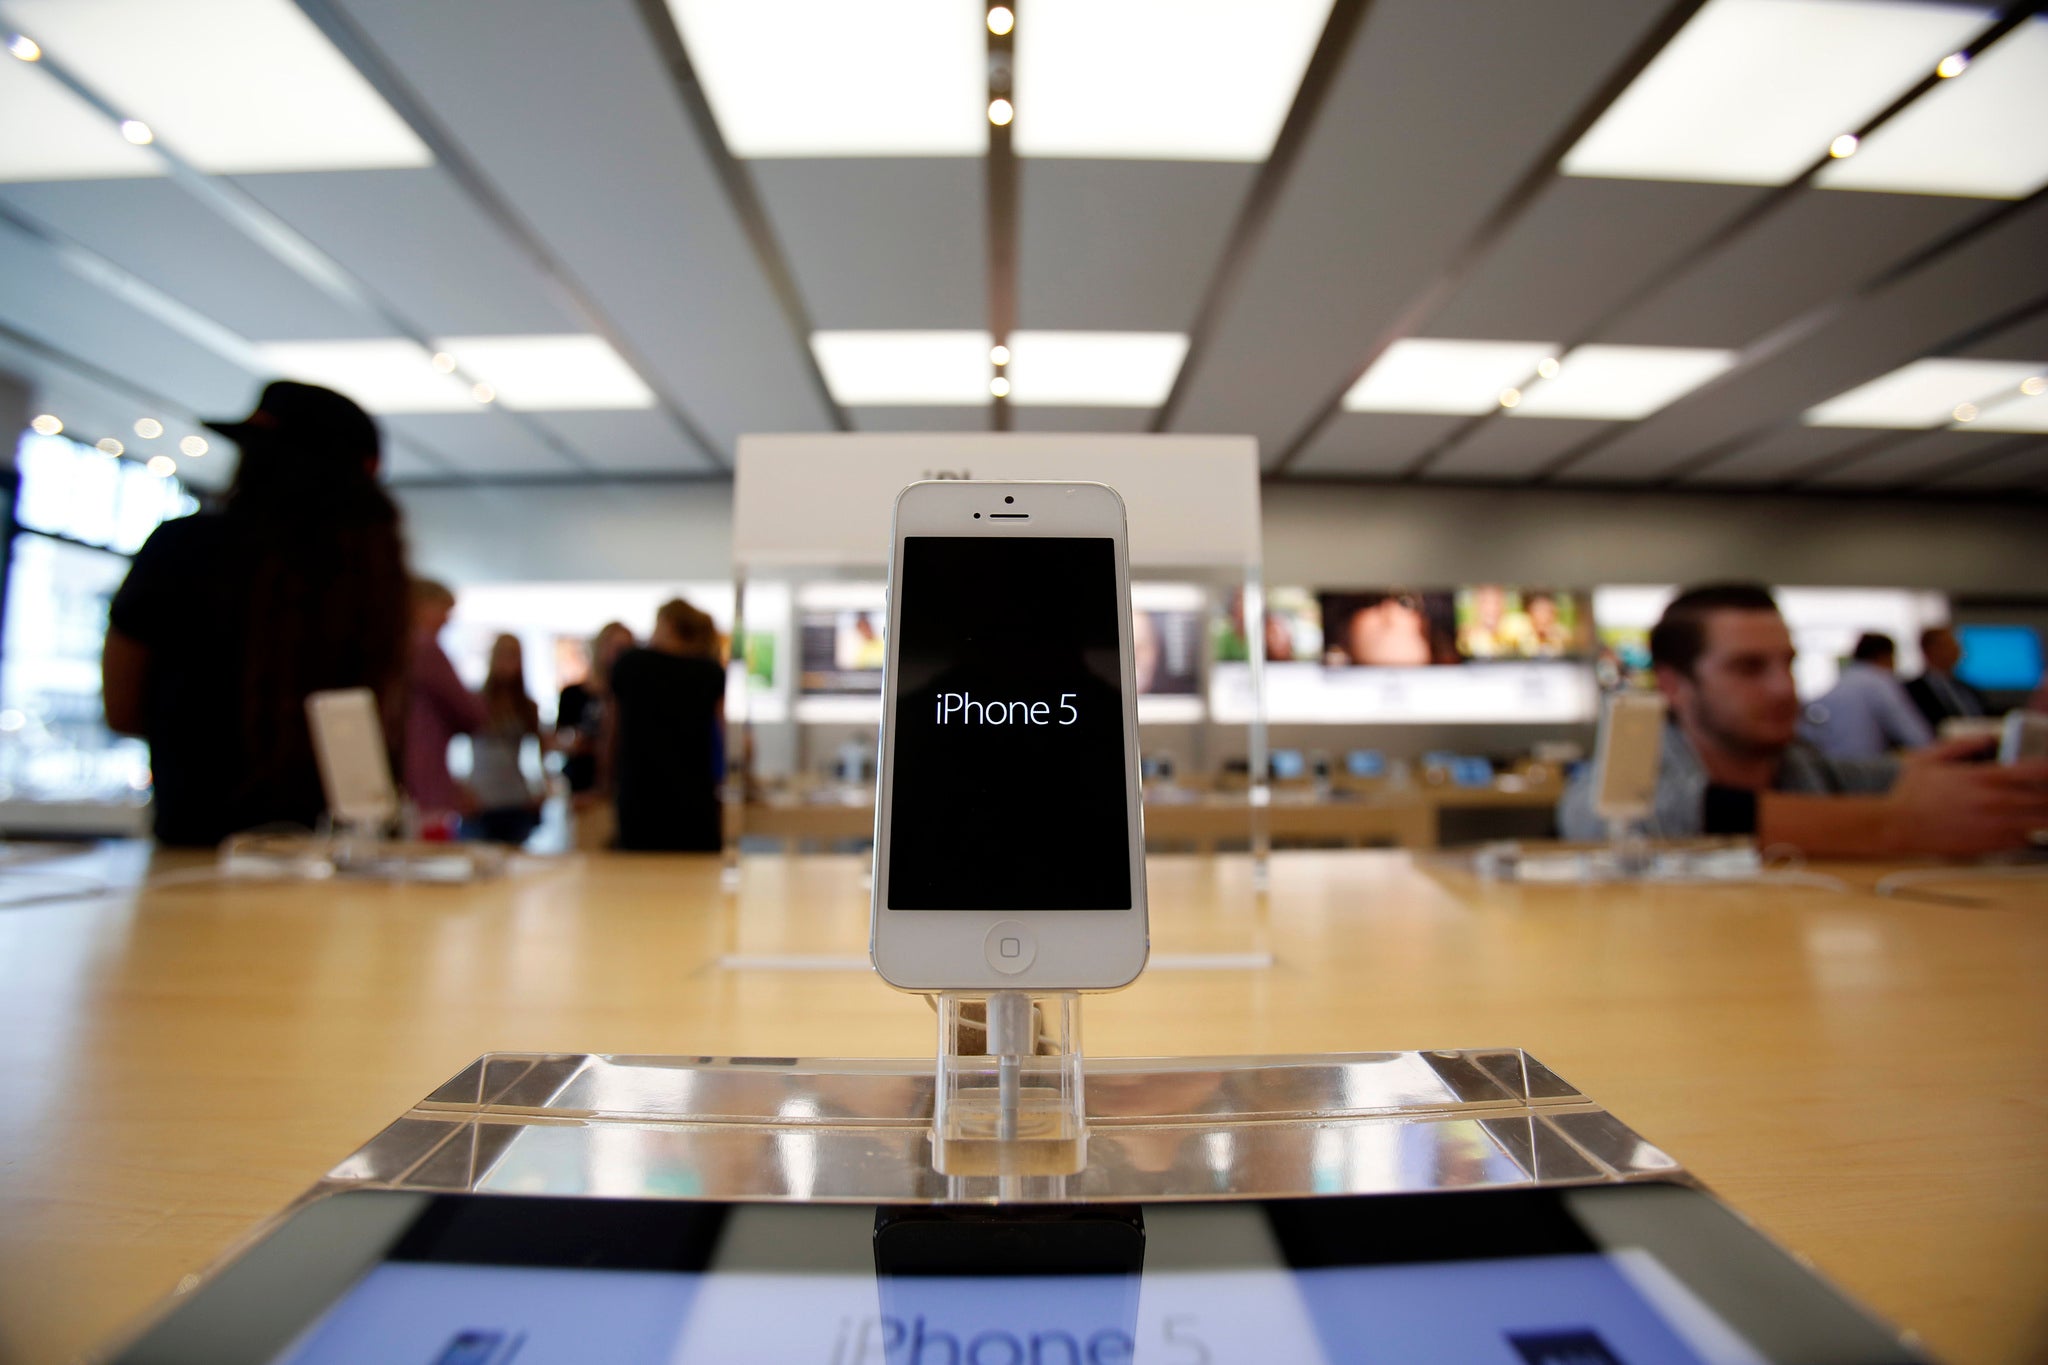 An iPhone 5 is pictured on display at an Apple Store in Pasadena, California July 22, 2013. REUTERS/Mario Anzuoni